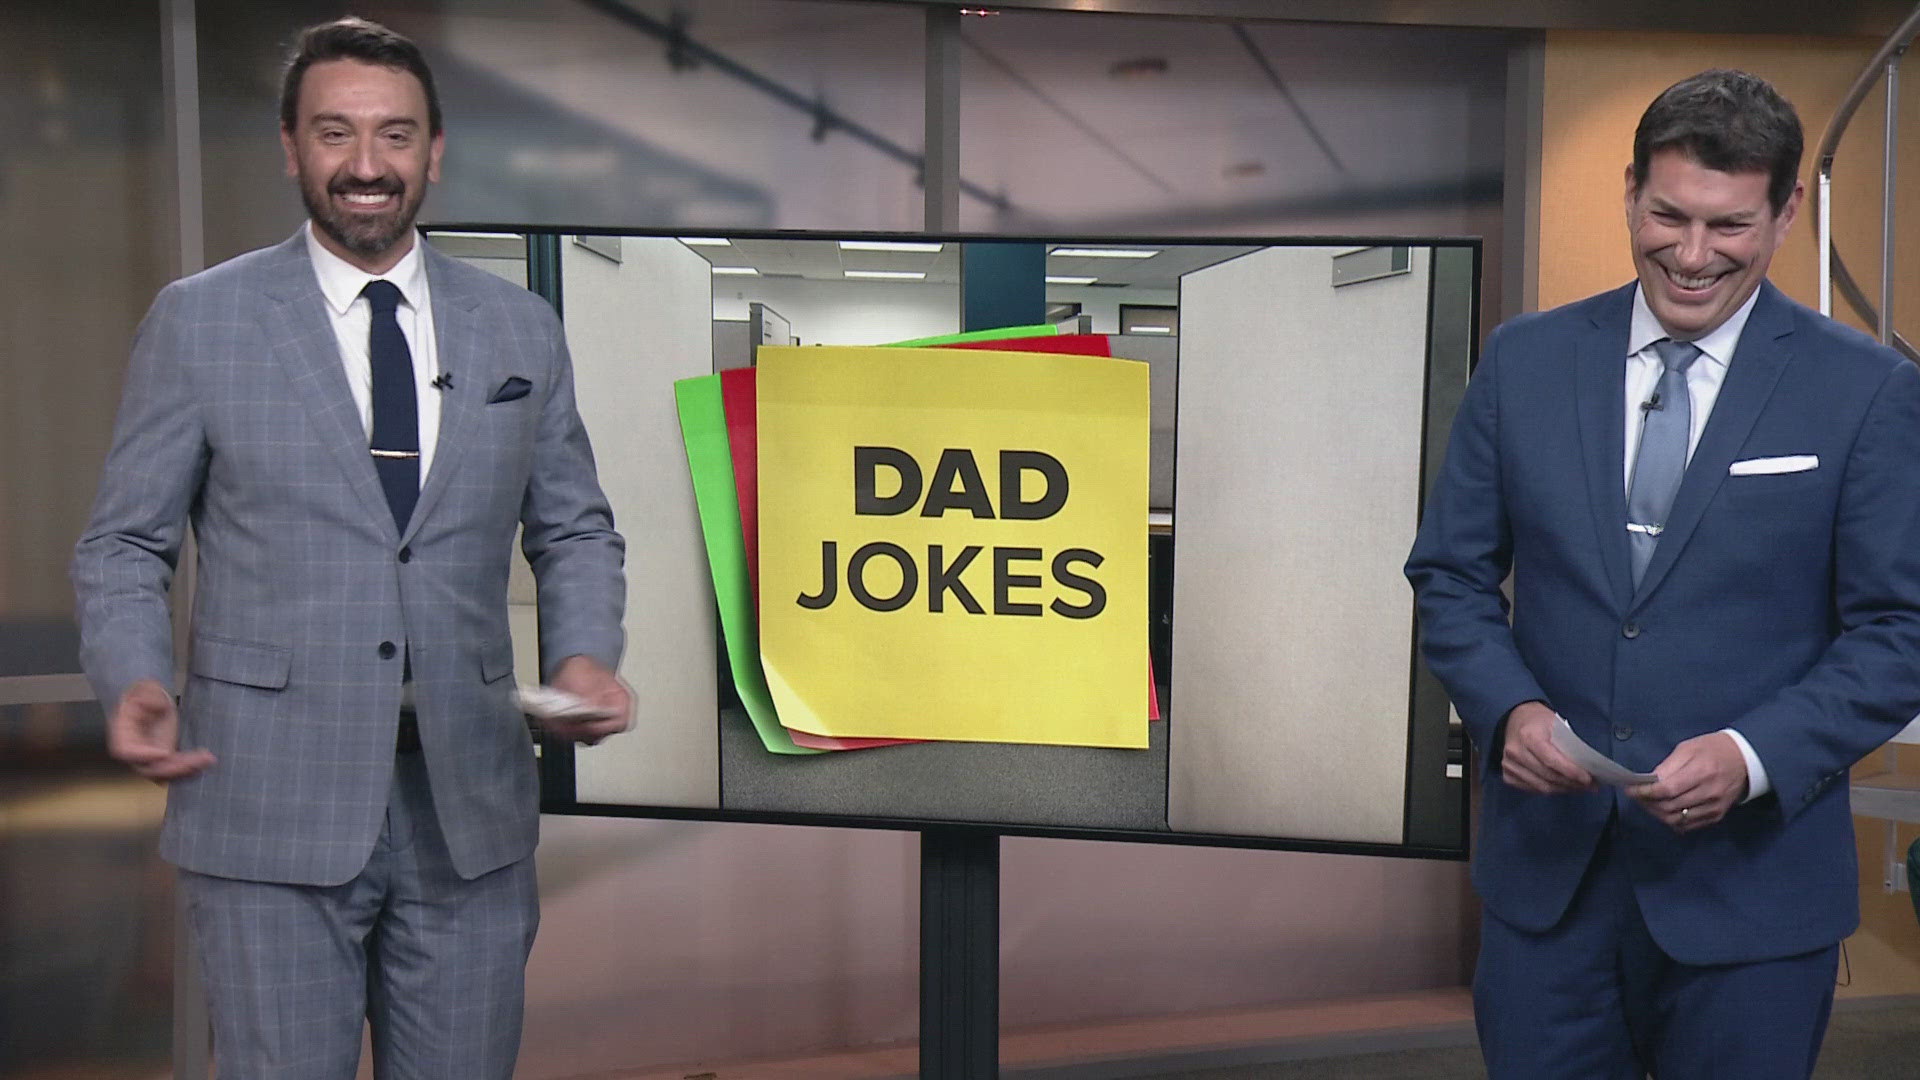 Enjoy the laughs! We have more dad jokes for you this morning.